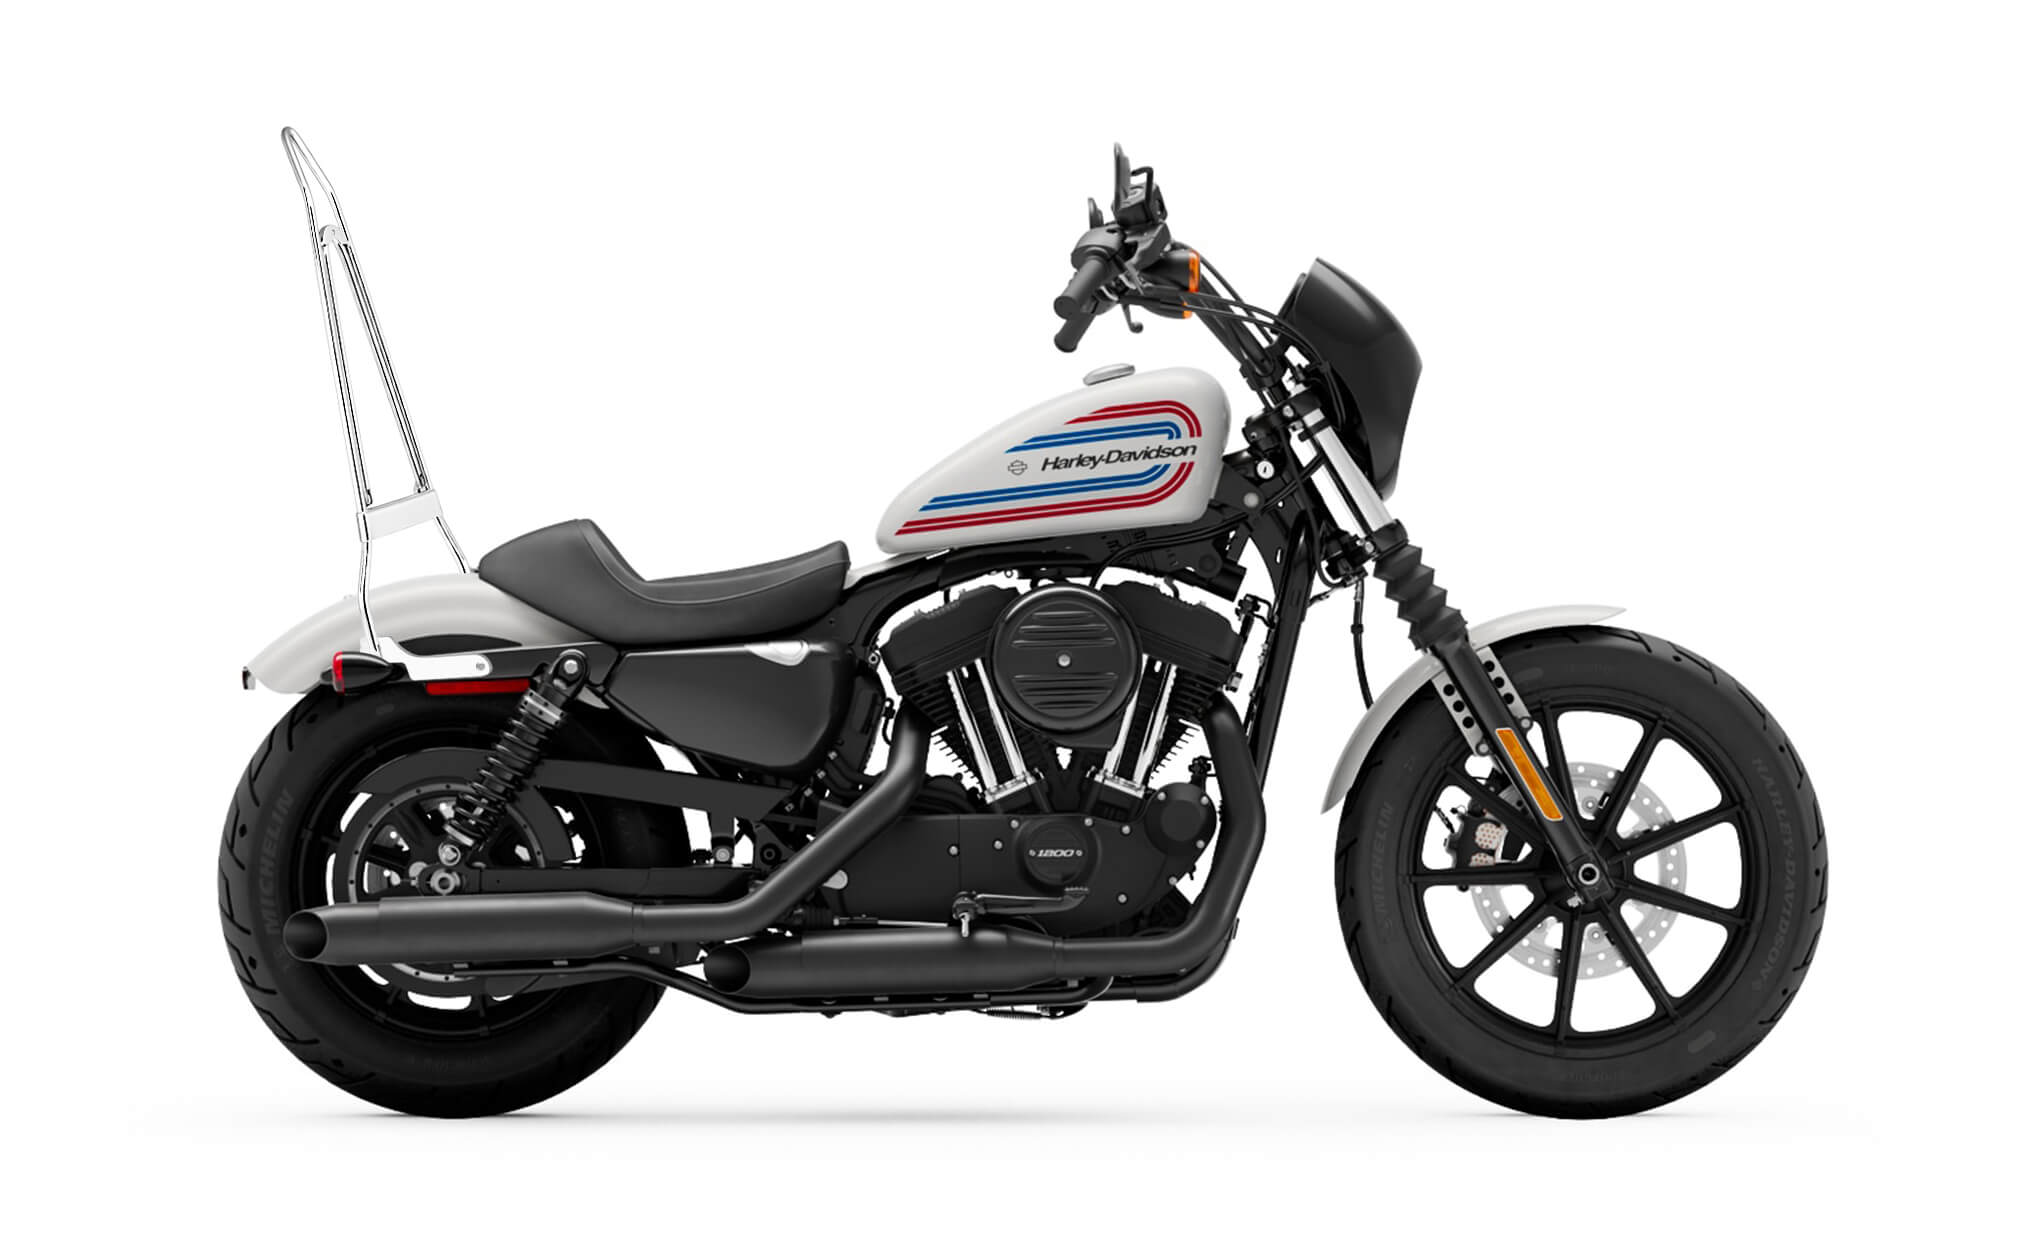 Iron Born Blade 25" Sissy Bar with Foldable Luggage Rack for Harley Sportster Iron 1200 Chrome Bag on Bike View @expand